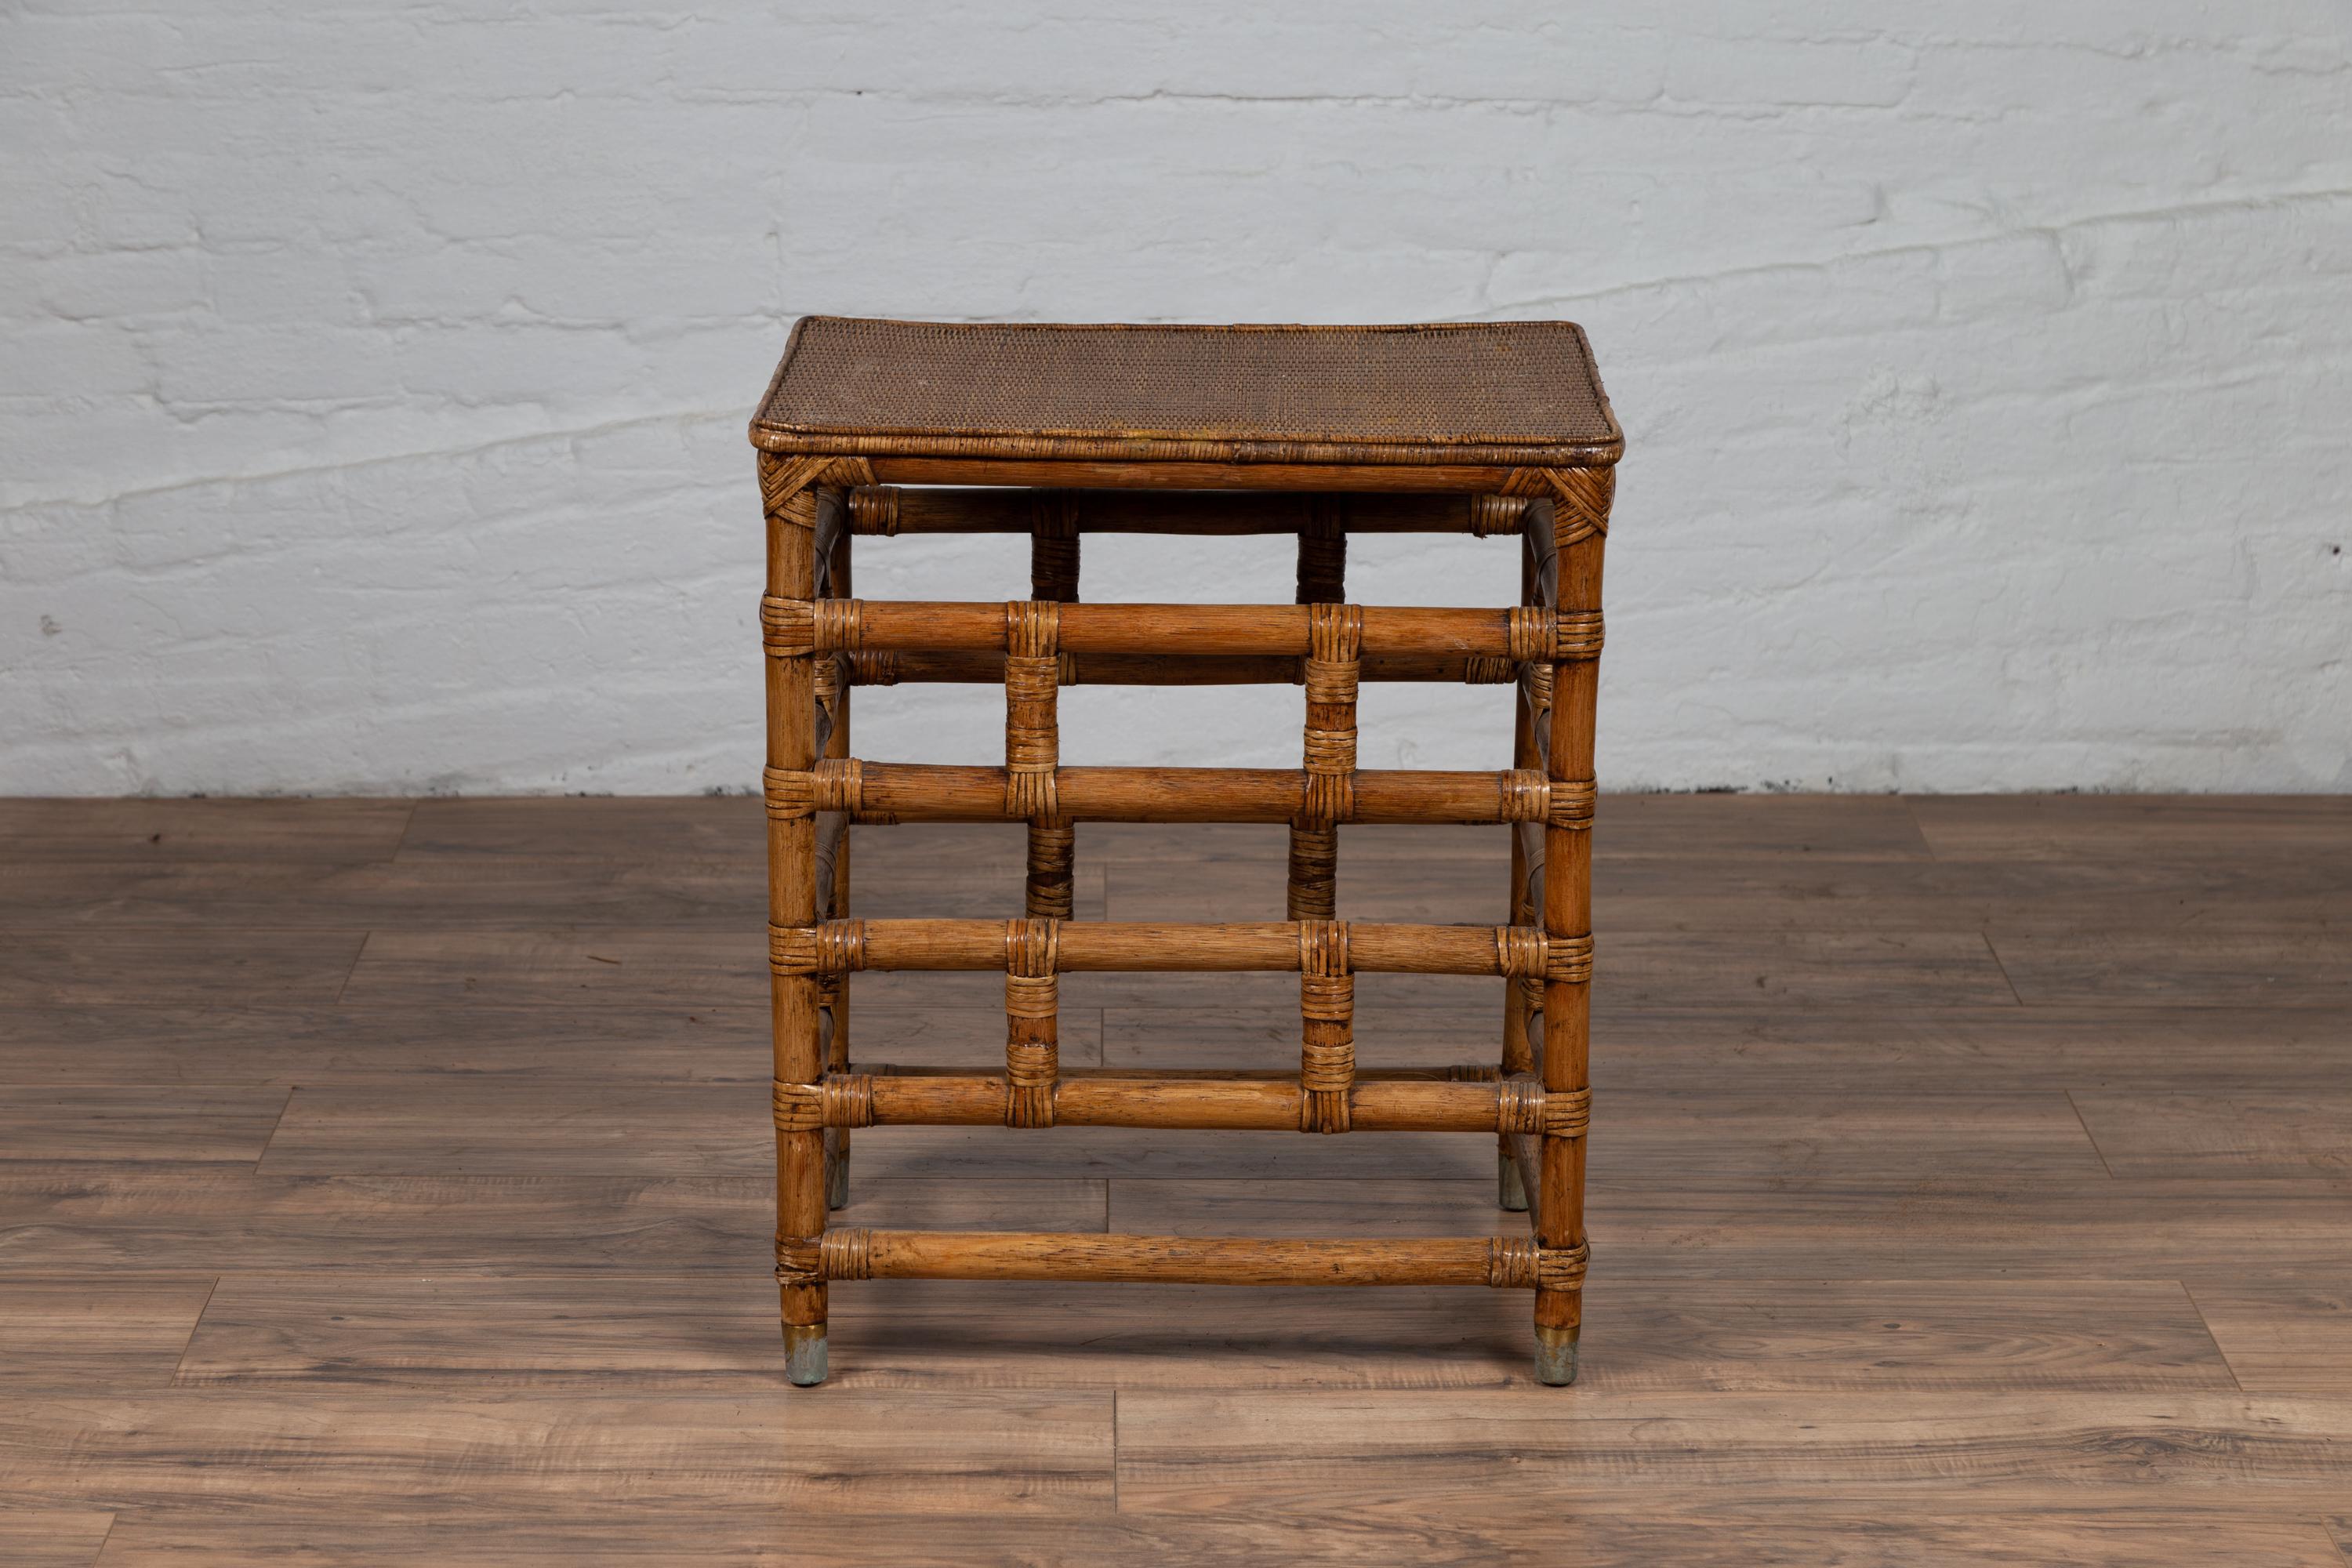 A vintage Thai bamboo side table from the mid-20th century, with rattan top. Born in Thailand during the mid-century period, this stylish side table features a linear silhouette made of a geometrically organized bamboo base. Surmounted by a rattan